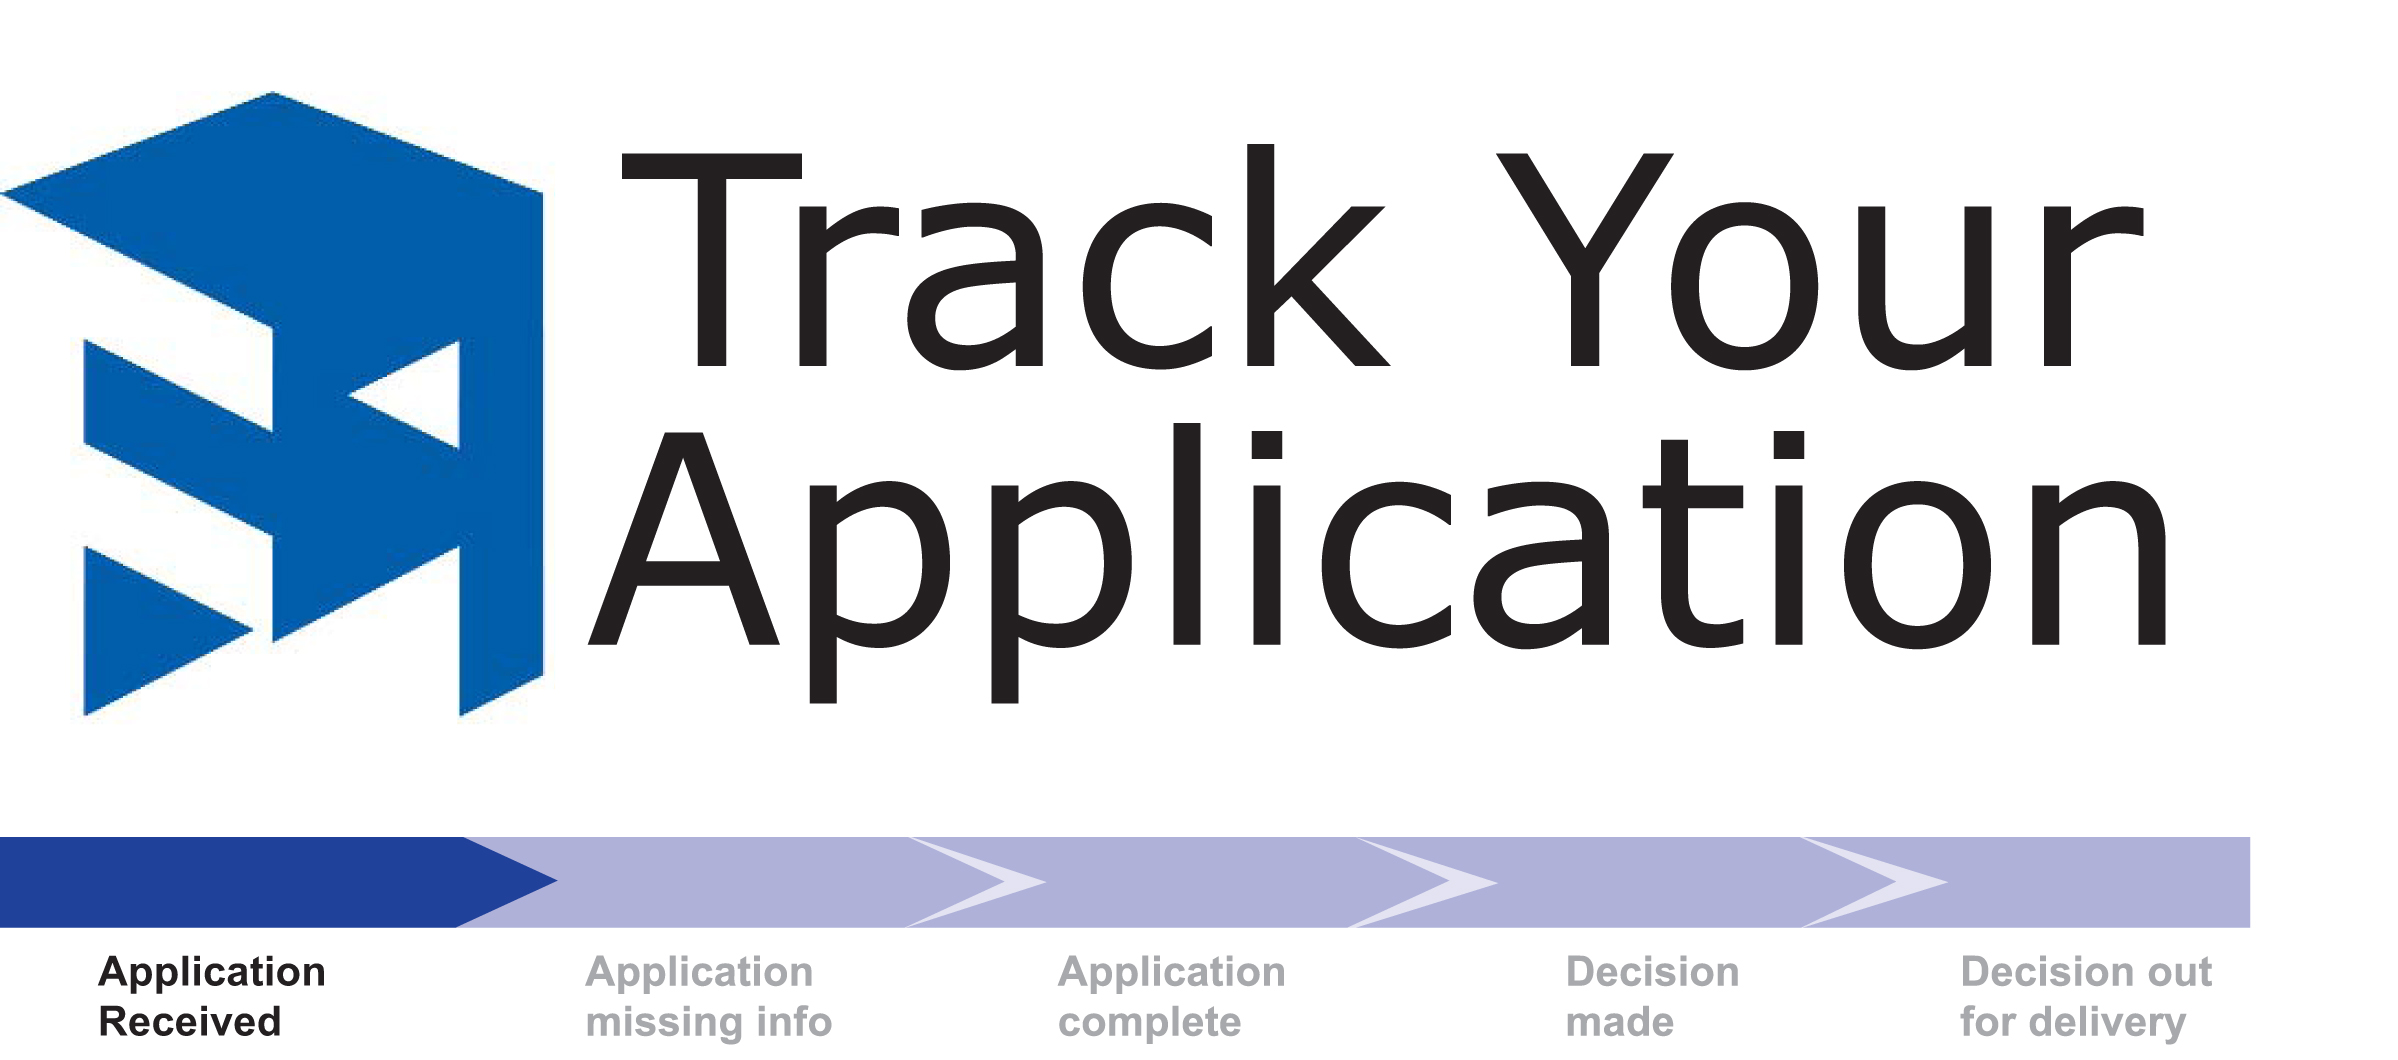 Track Your Application Stage 1: Application Received